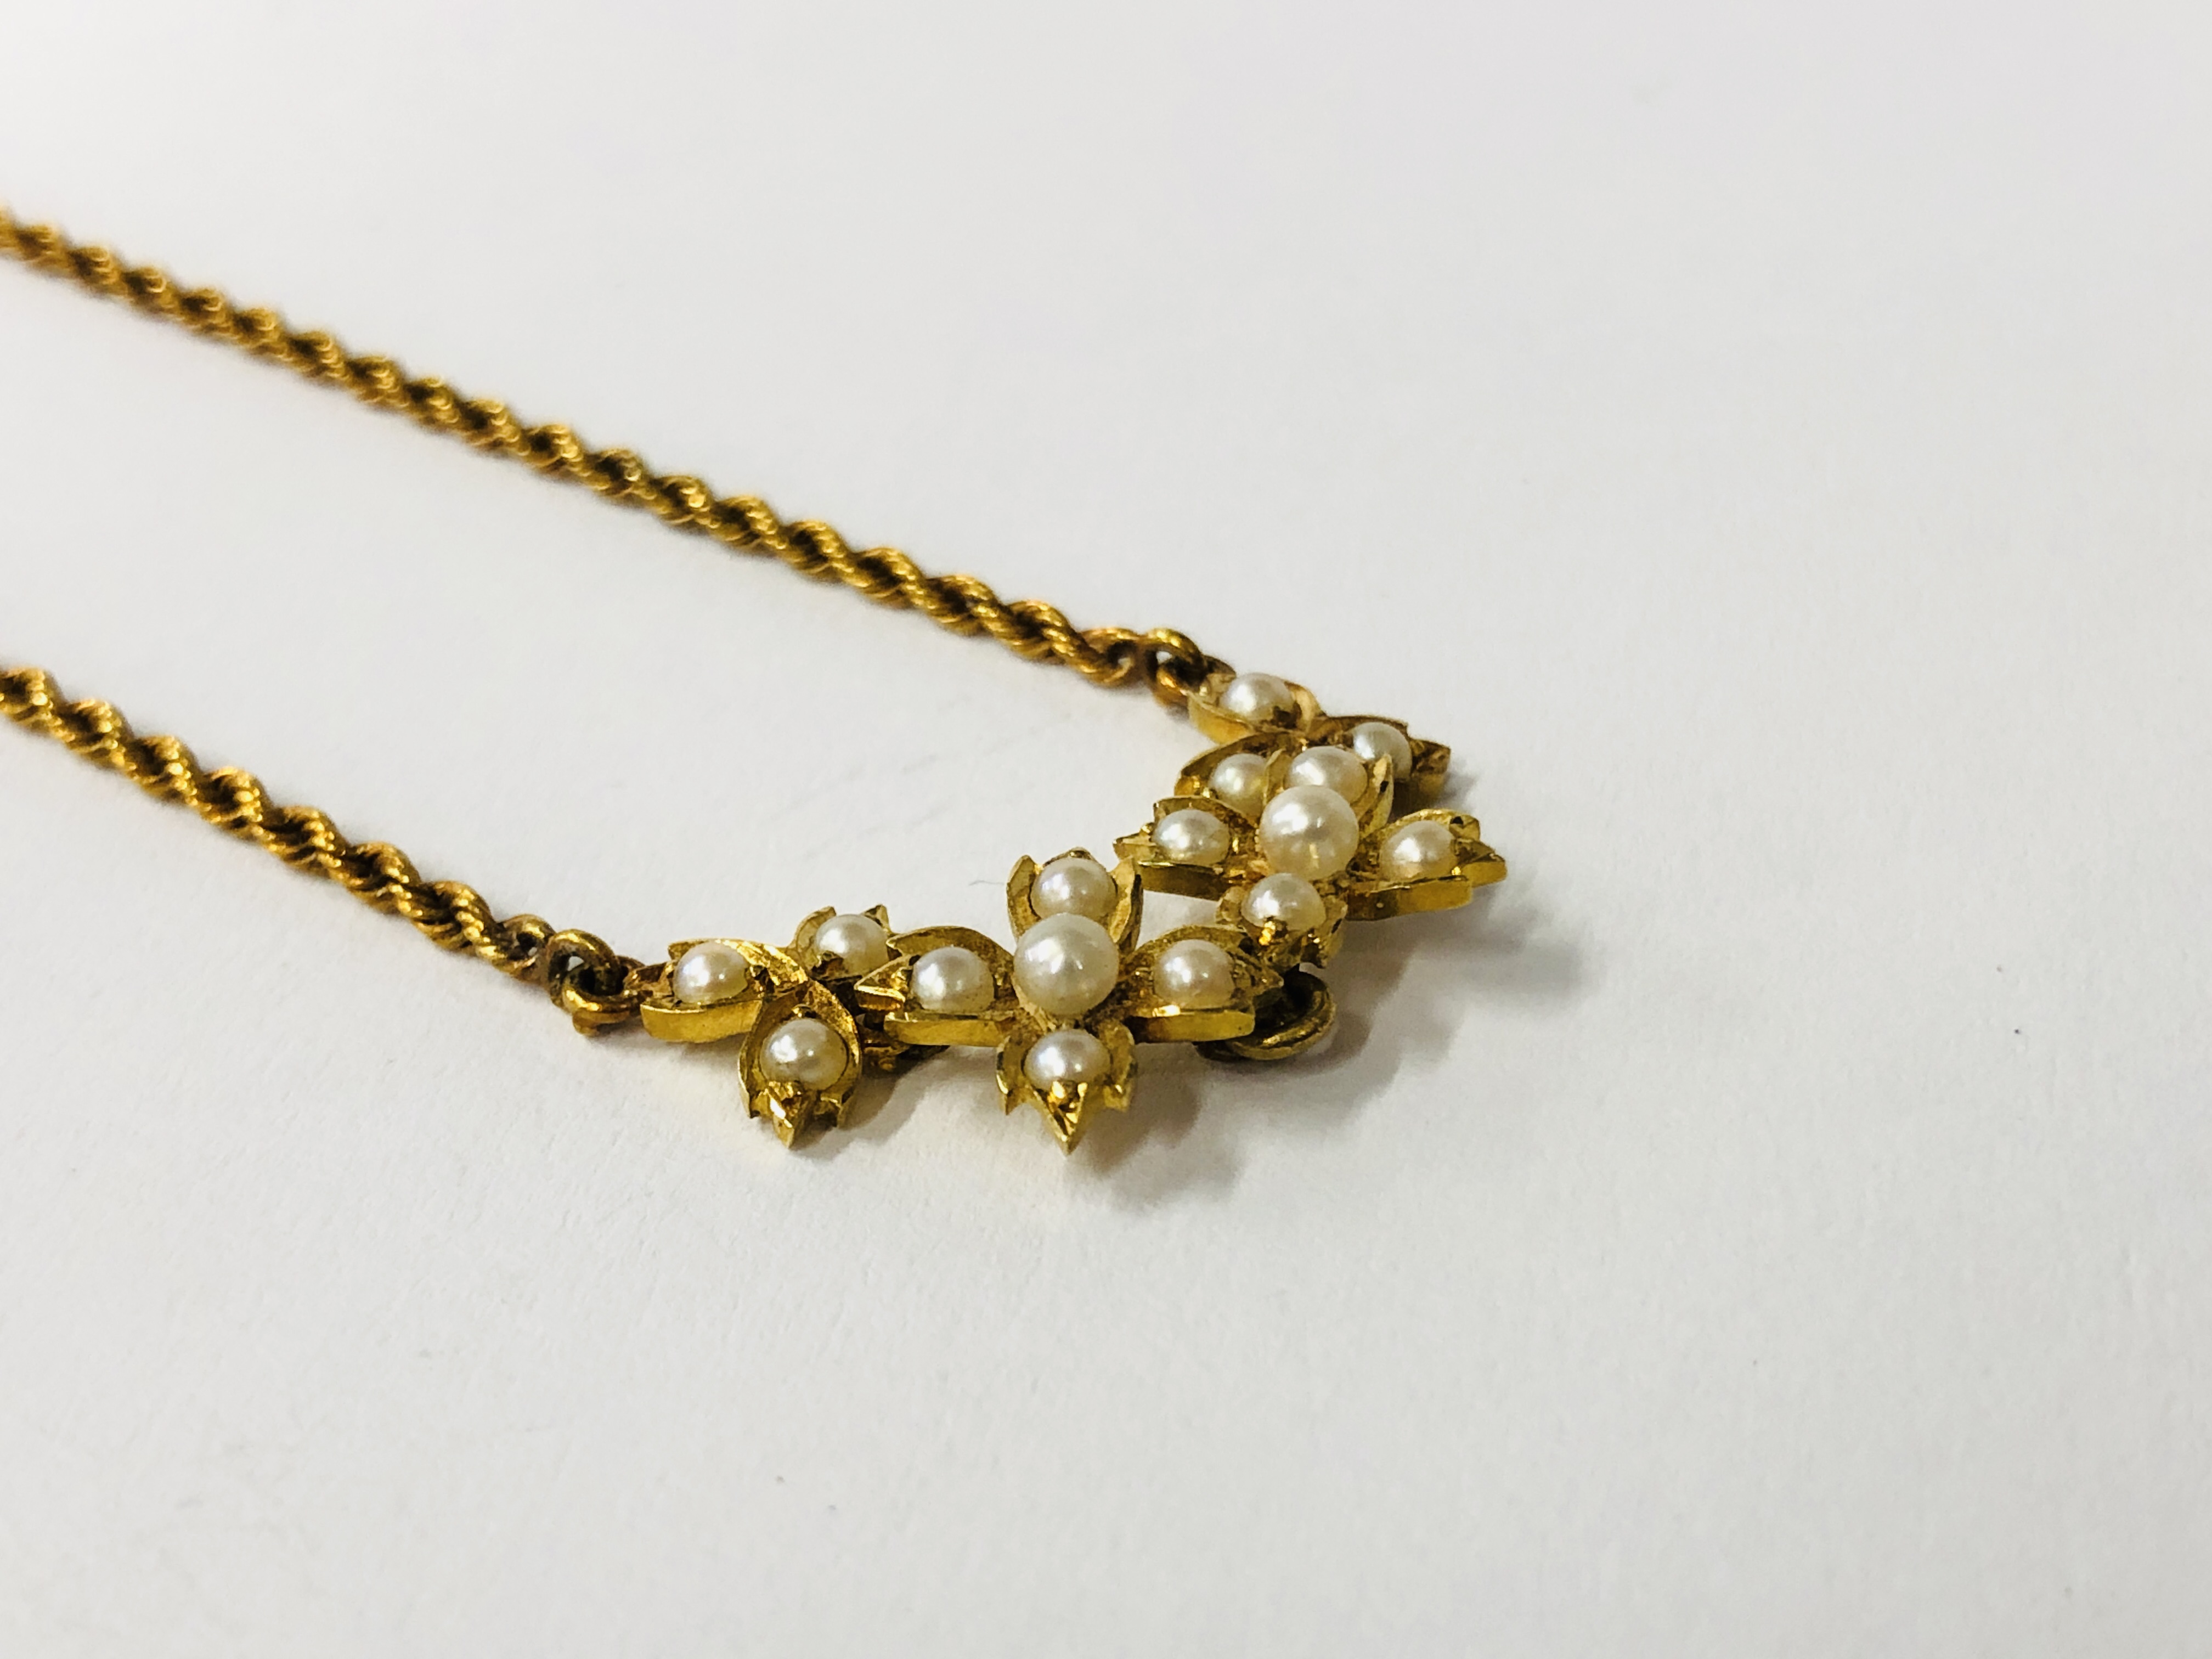 AN ANTIQUE CHILD'S YELLOW METAL ROPE DESIGN NECKLACE SET WITH SEED PEARLS, LENGTH 31CM. - Image 2 of 9